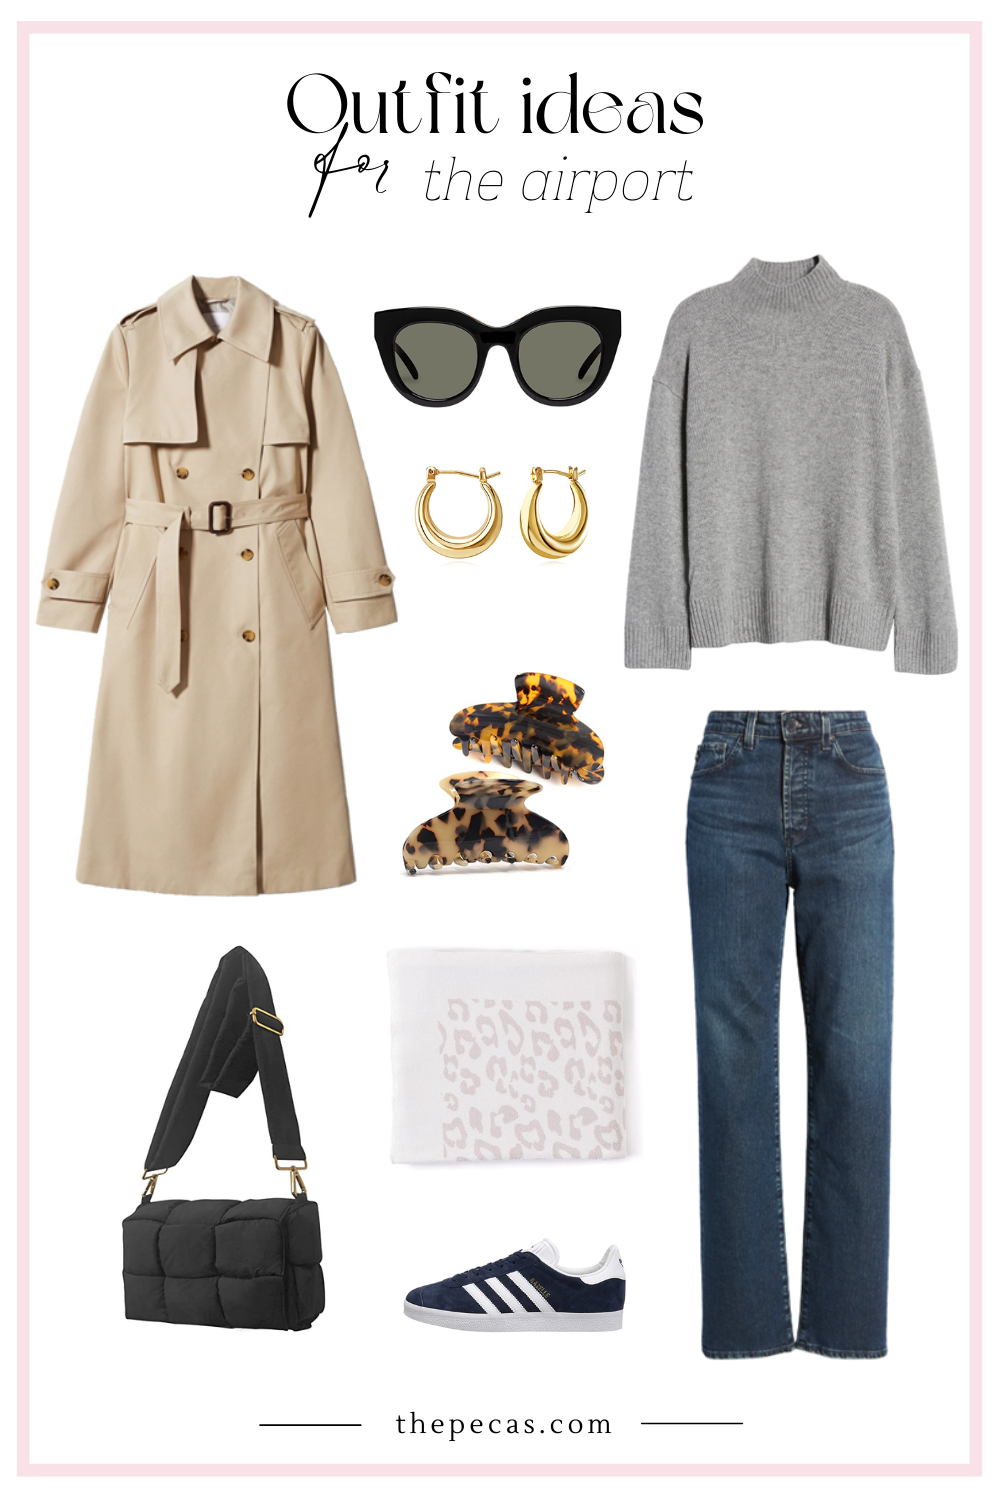 Fashion Friday – Airport outfit ideas – The pecas